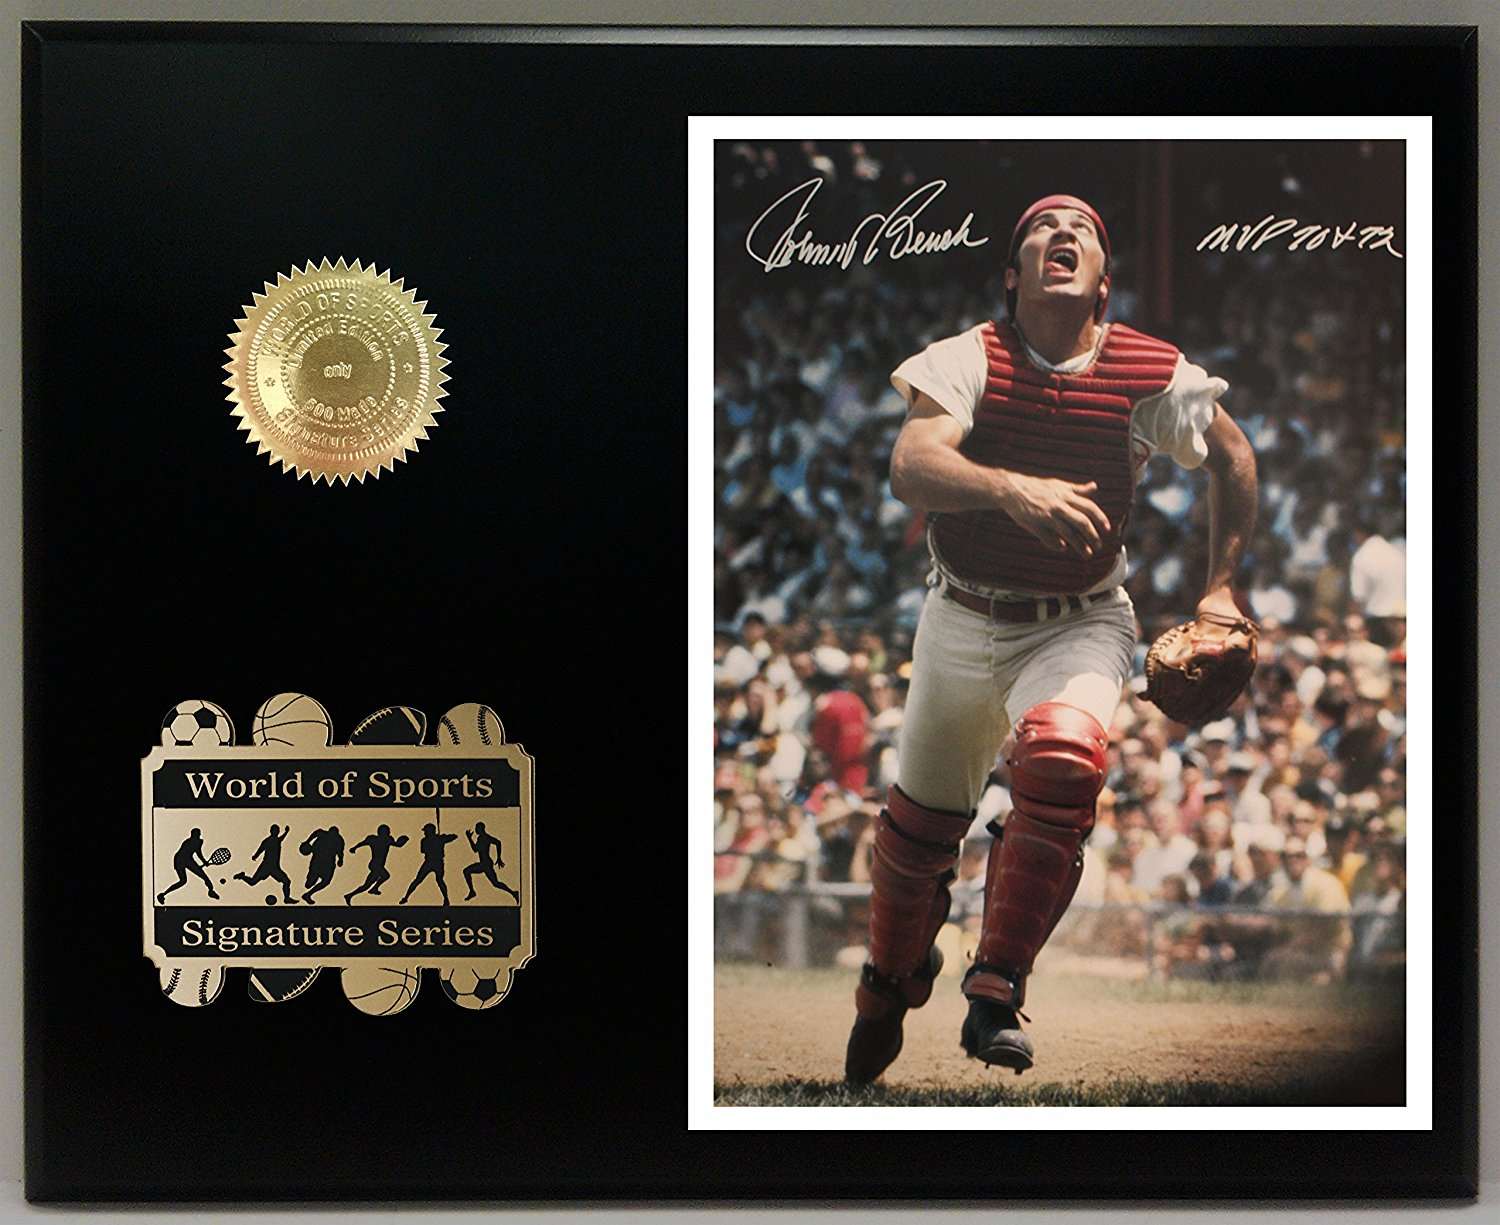 Johnny Bench Ltd. Edition Sports Reproduction Signature Display - Gold  Record Outlet Album and Disc Collectible Memorabilia